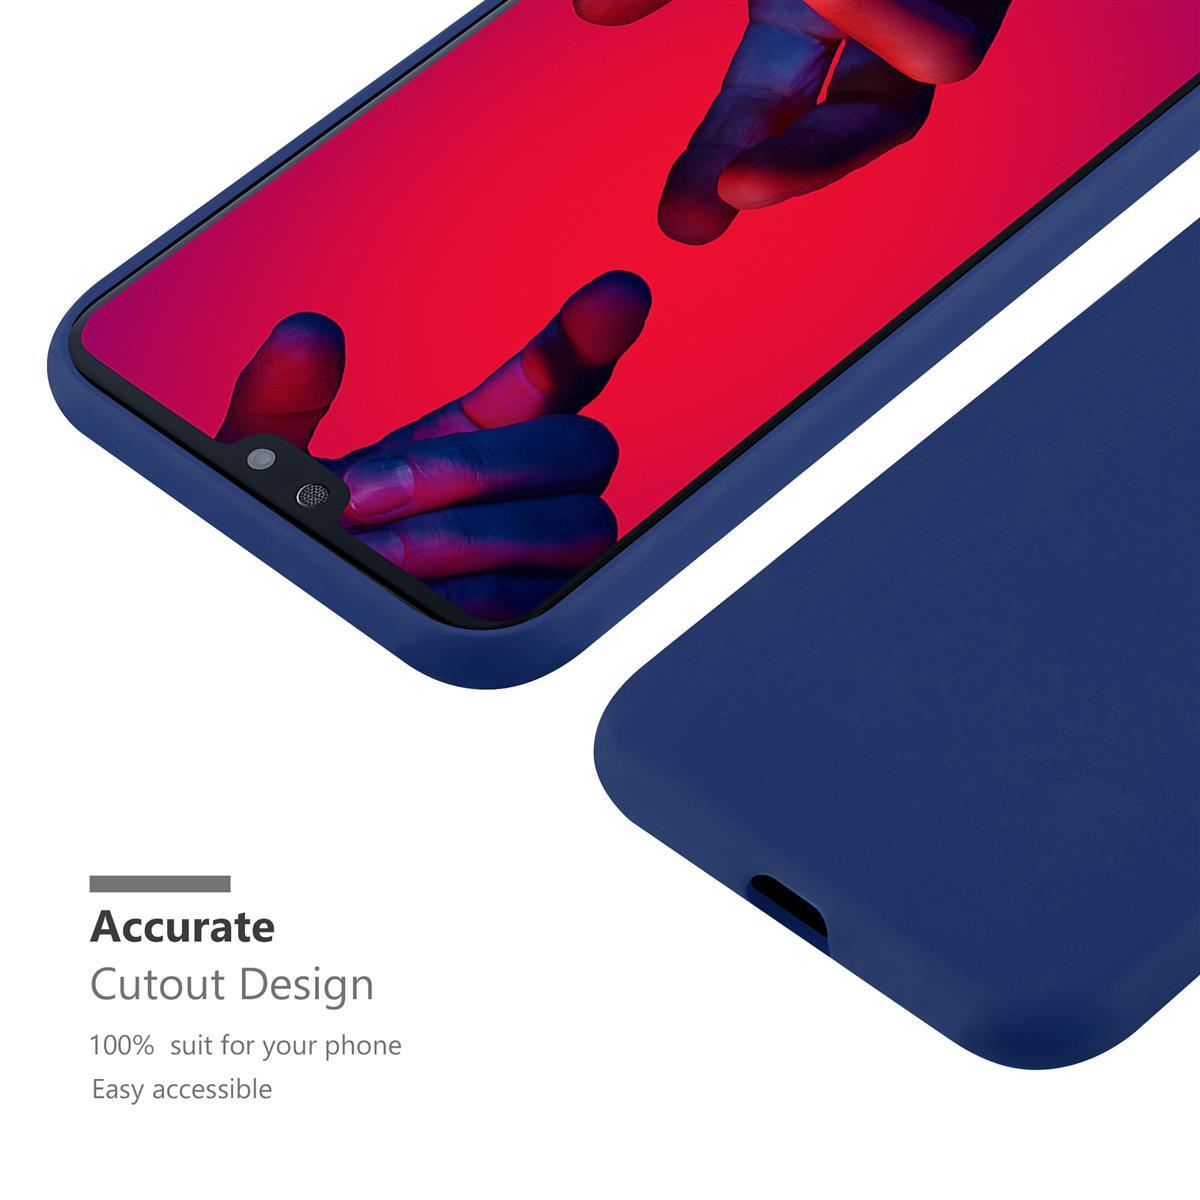 PLUS, P20 BLAU im Backcover, Huawei, P20 Hülle DUNKEL CADORABO PRO Style, CANDY Candy / TPU